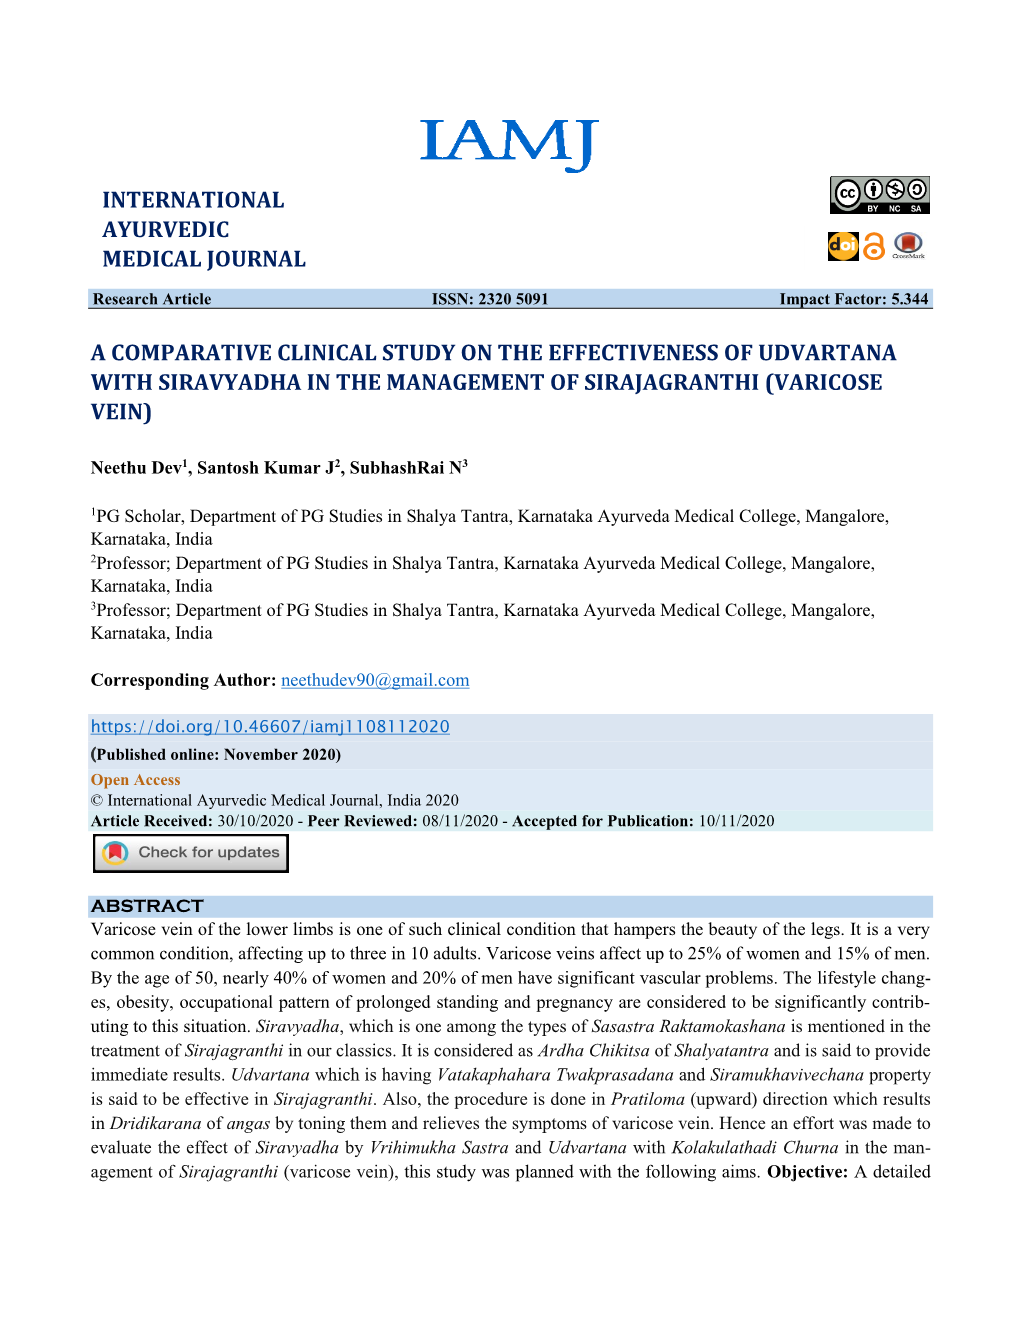 A Comparative Clinical Study on the Effectiveness of Udvartana with Siravyadha in the Management of Sirajagranthi (Varicose Vein)